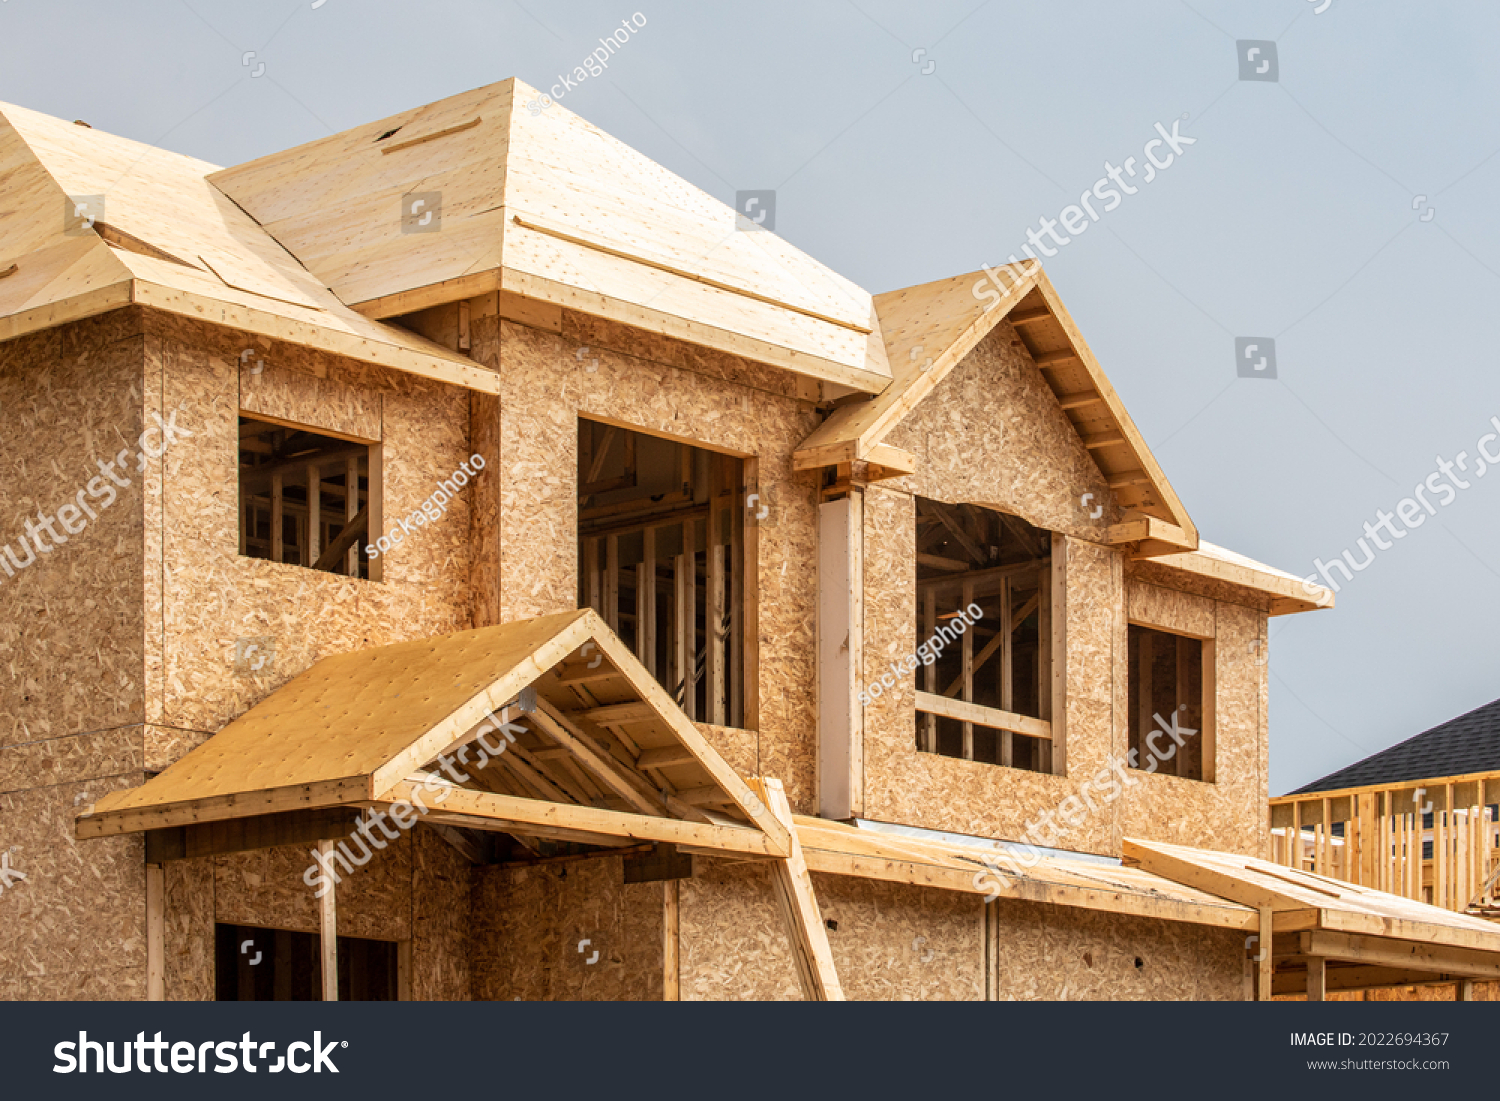 A residential house construction project showing plywood roof and dormer sheathing and oriented strand board or chip board sheathing on the exterior walls #2022694367